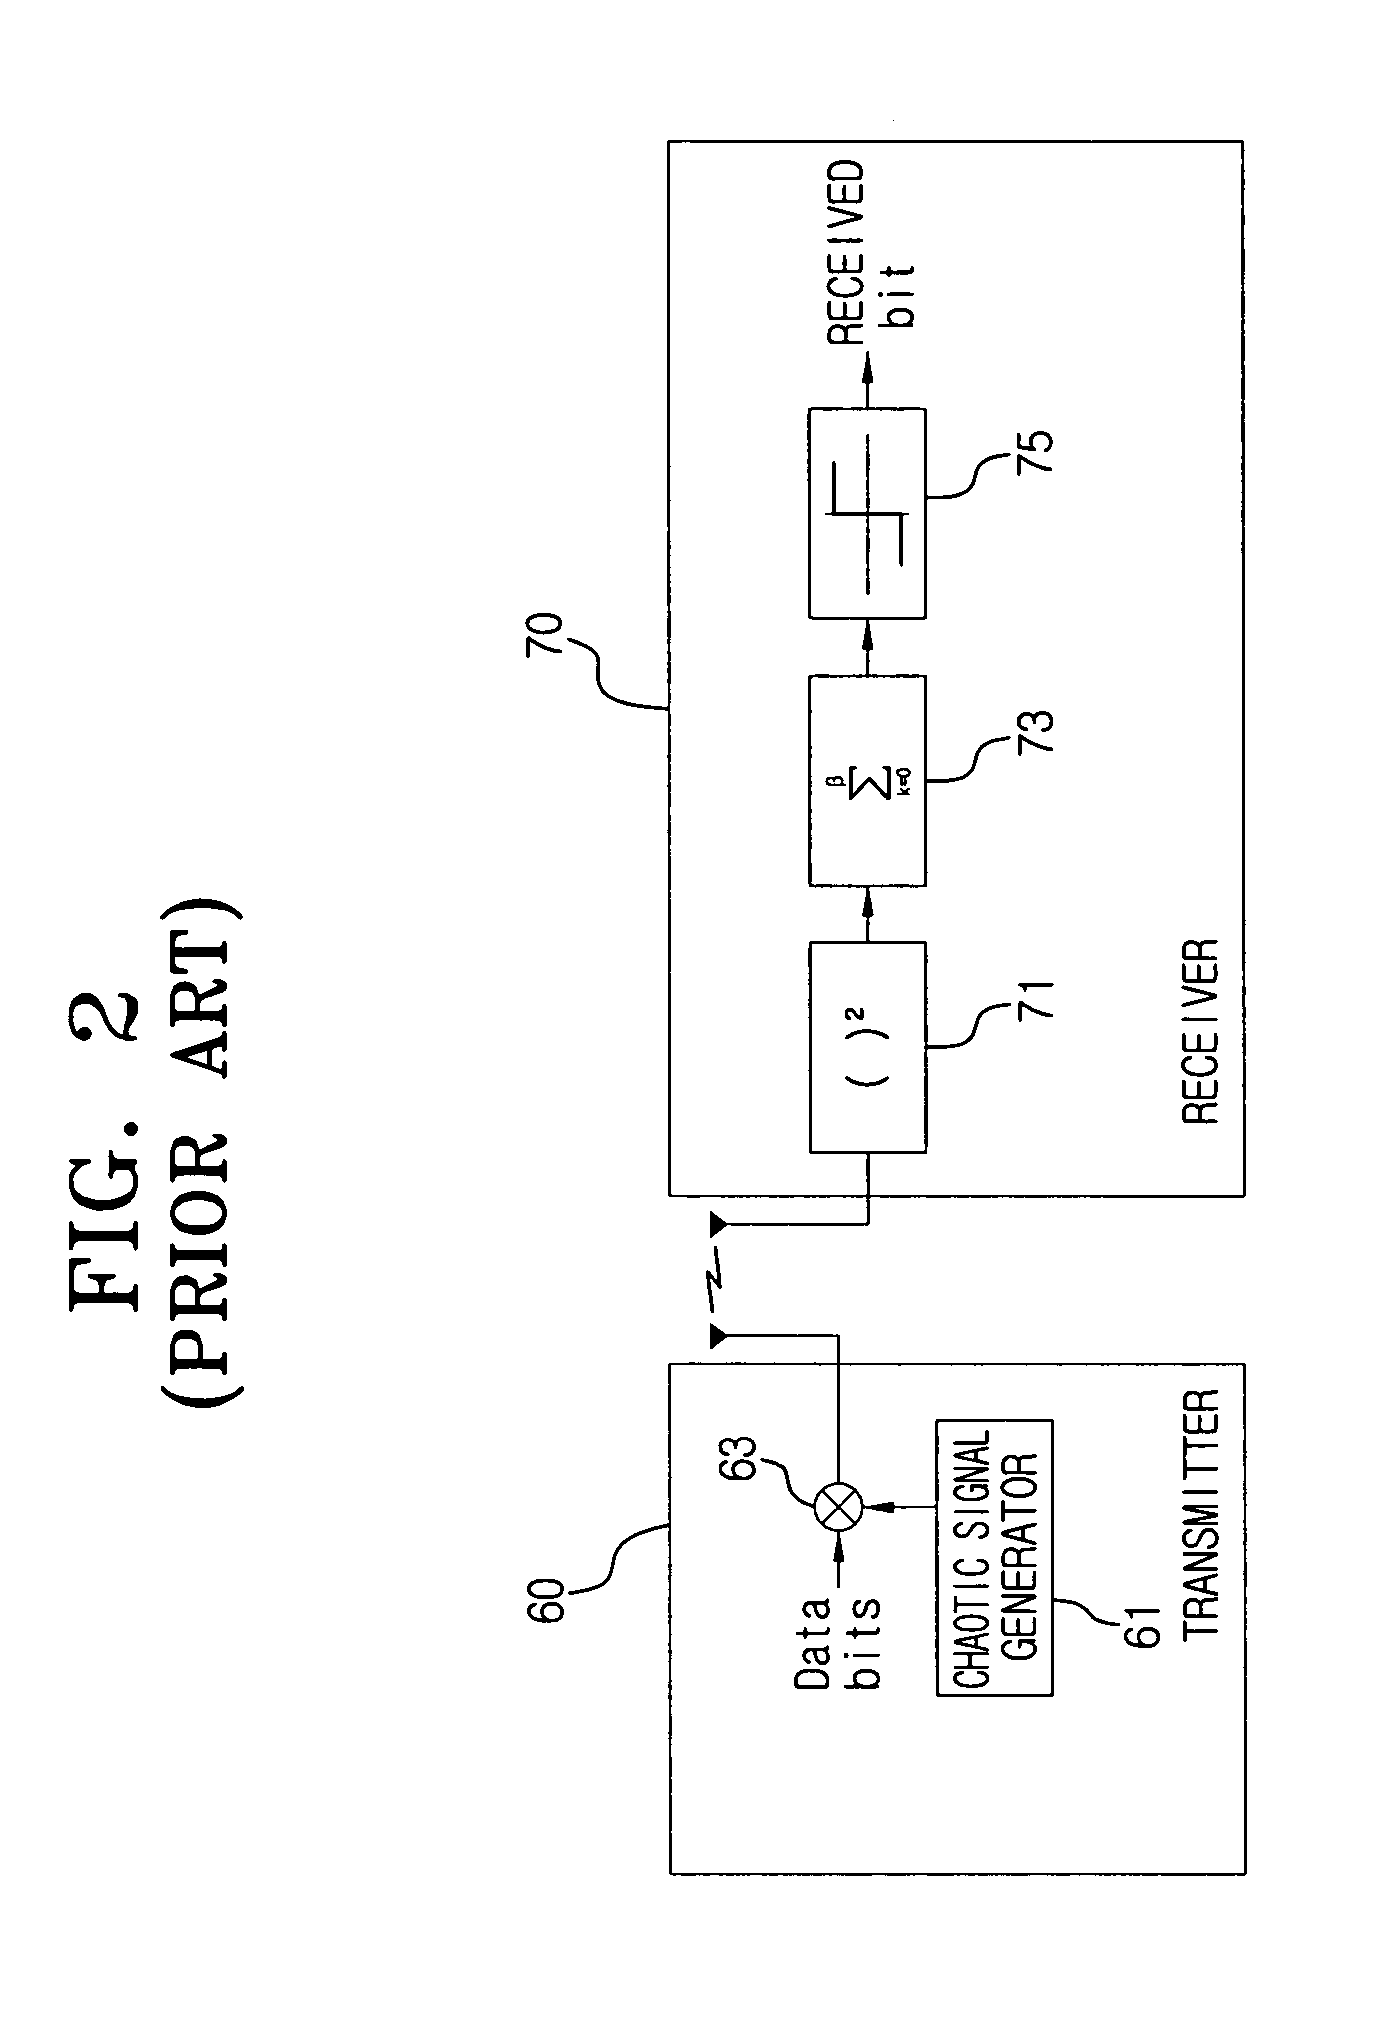 Pulse position based-chaotic modulation (PPB-CM) communication system and method